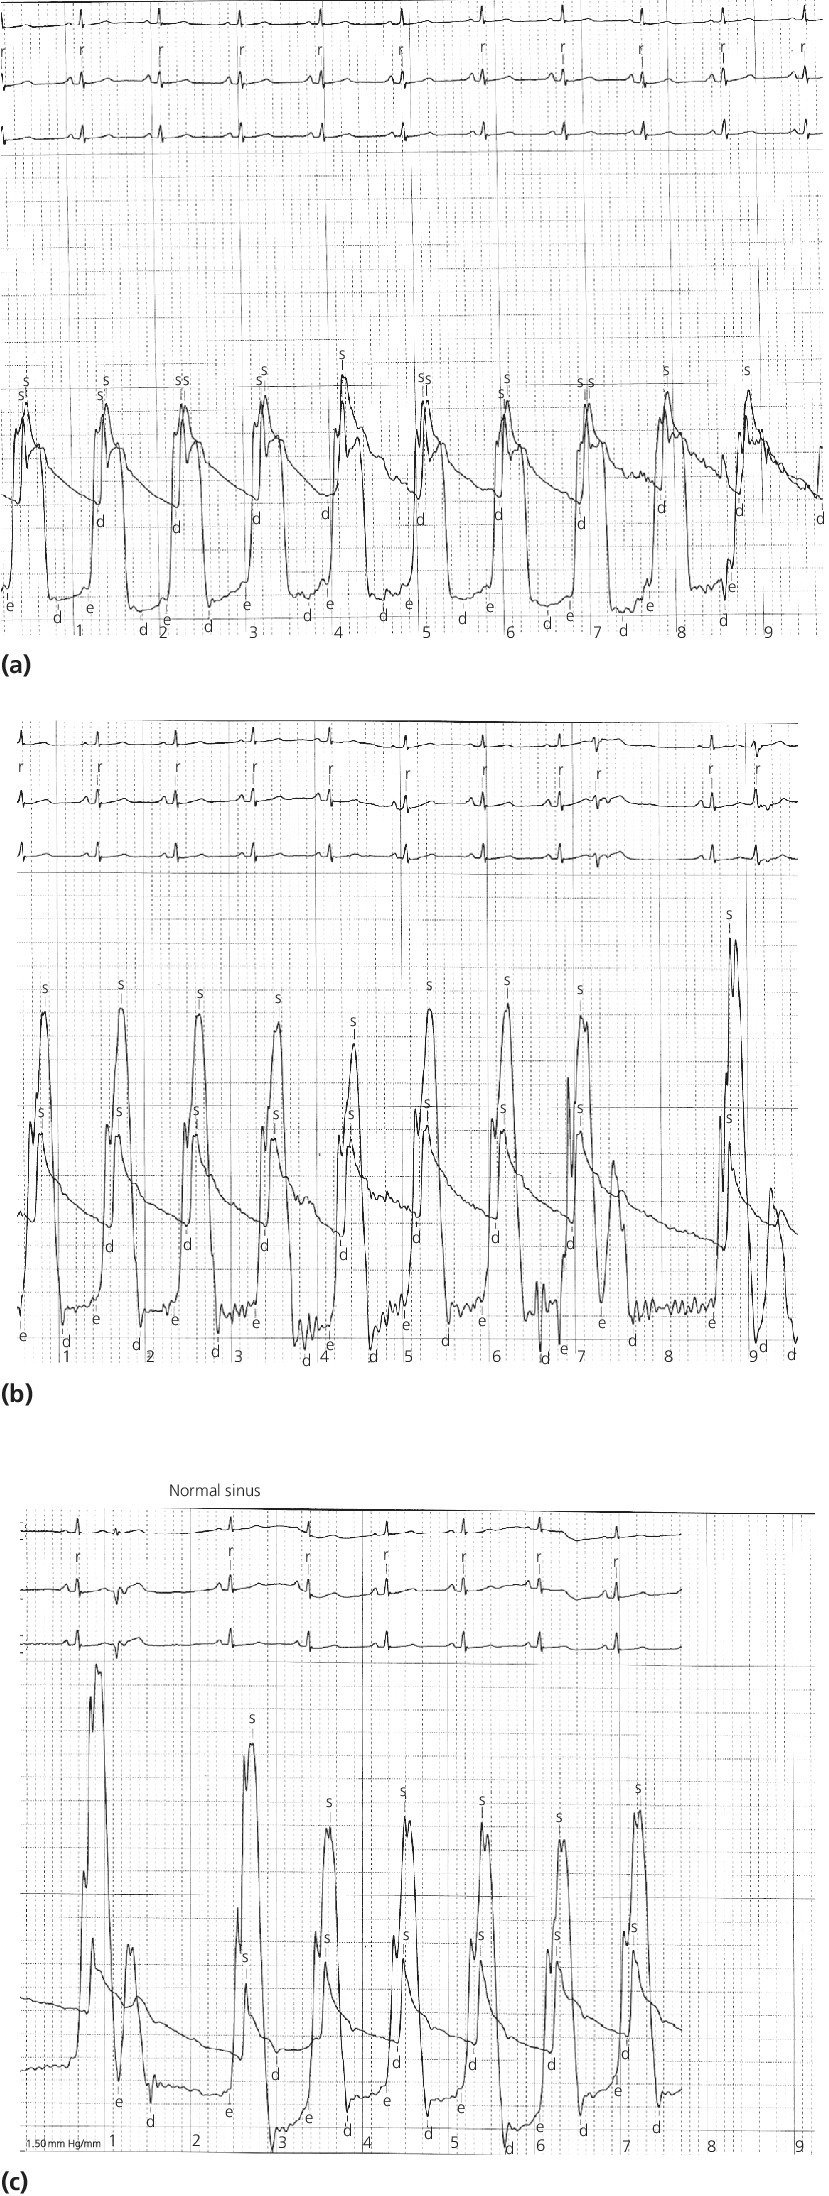 3 ECGs displaying the falling of aortic pressure with gradient (top), aortic pressure continues to fall with increasing gradient (middle), and tracings recorded on 200 mm Hg scale (bottom).